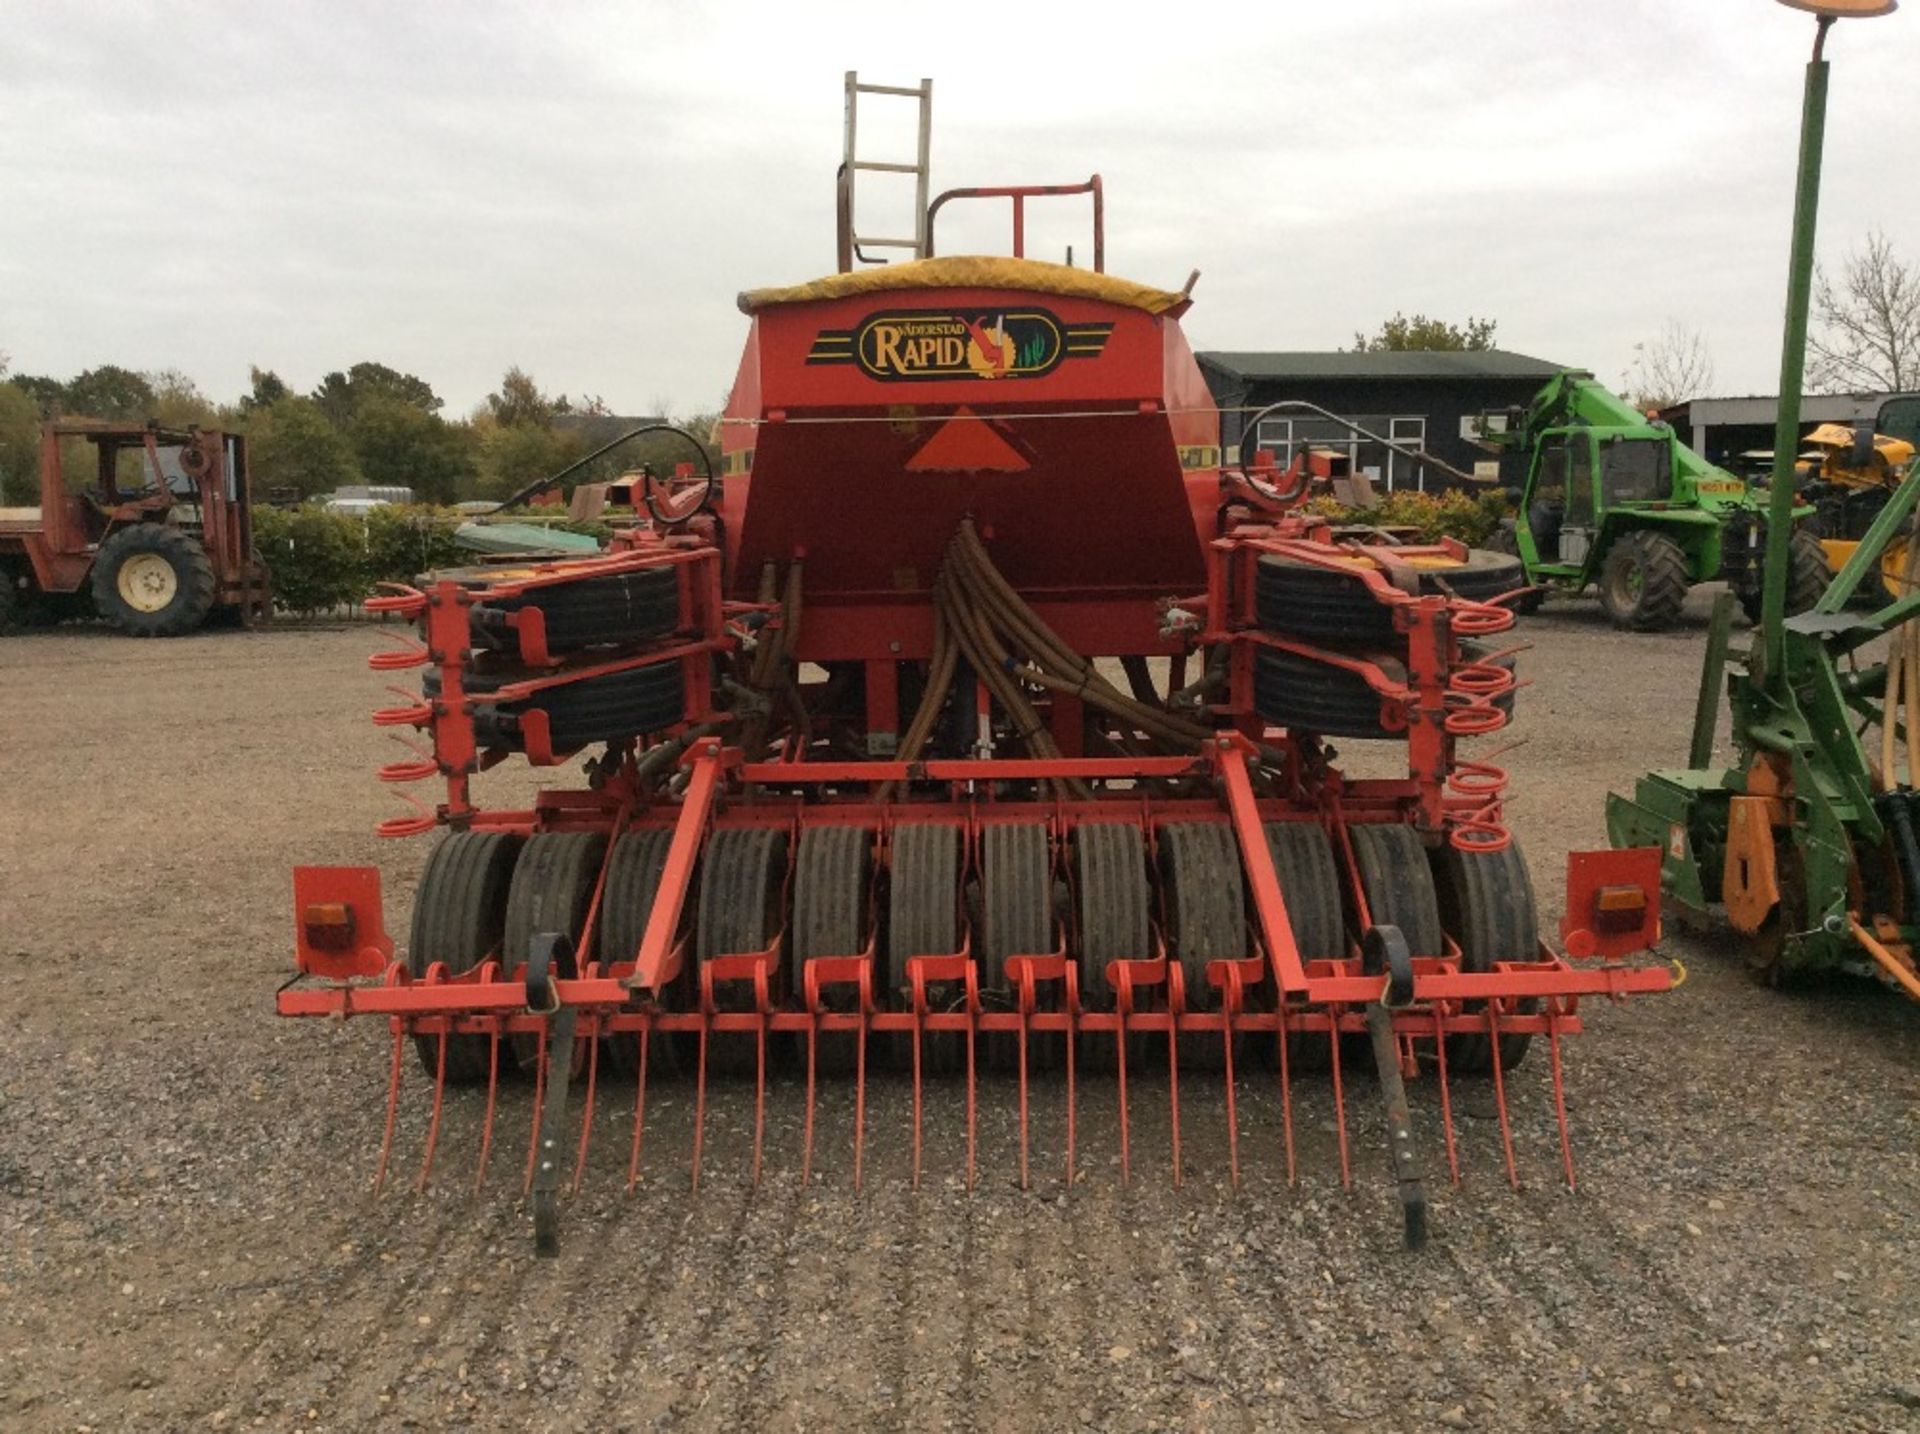 Vaderstad Rapid 400E 4M system tine drill. 1997. With hydraulic fan, front tines, cross board, - Image 3 of 3